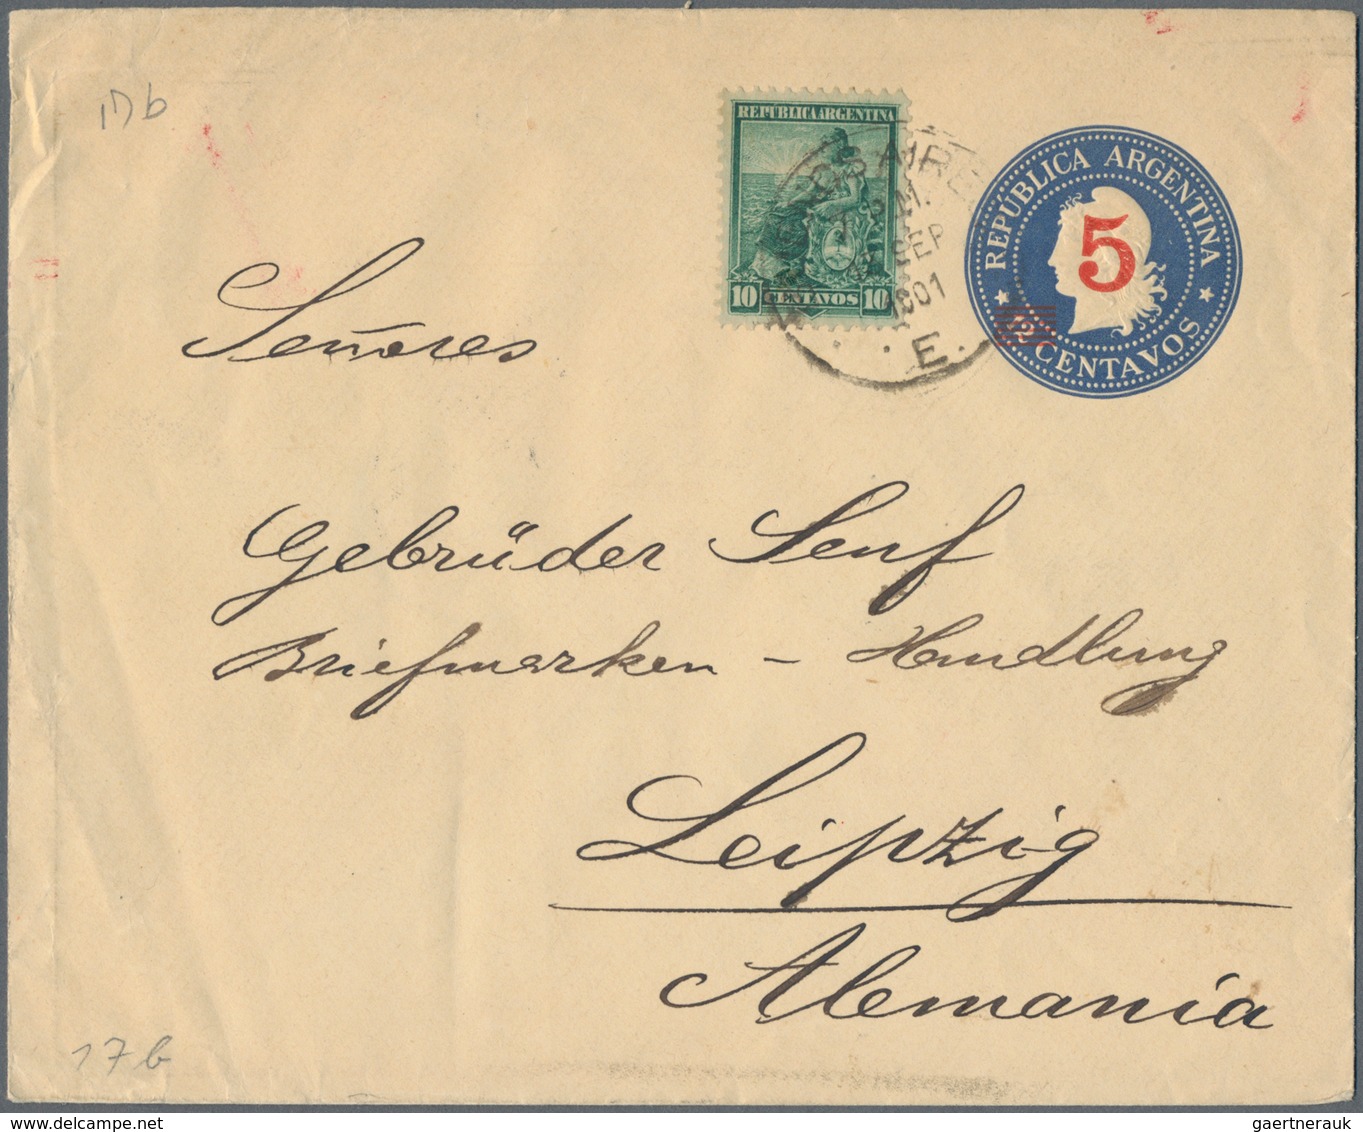 Argentinien - Ganzsachen: 1876/1952 holding of ca. 140 unused and used postal stationery envelopes,